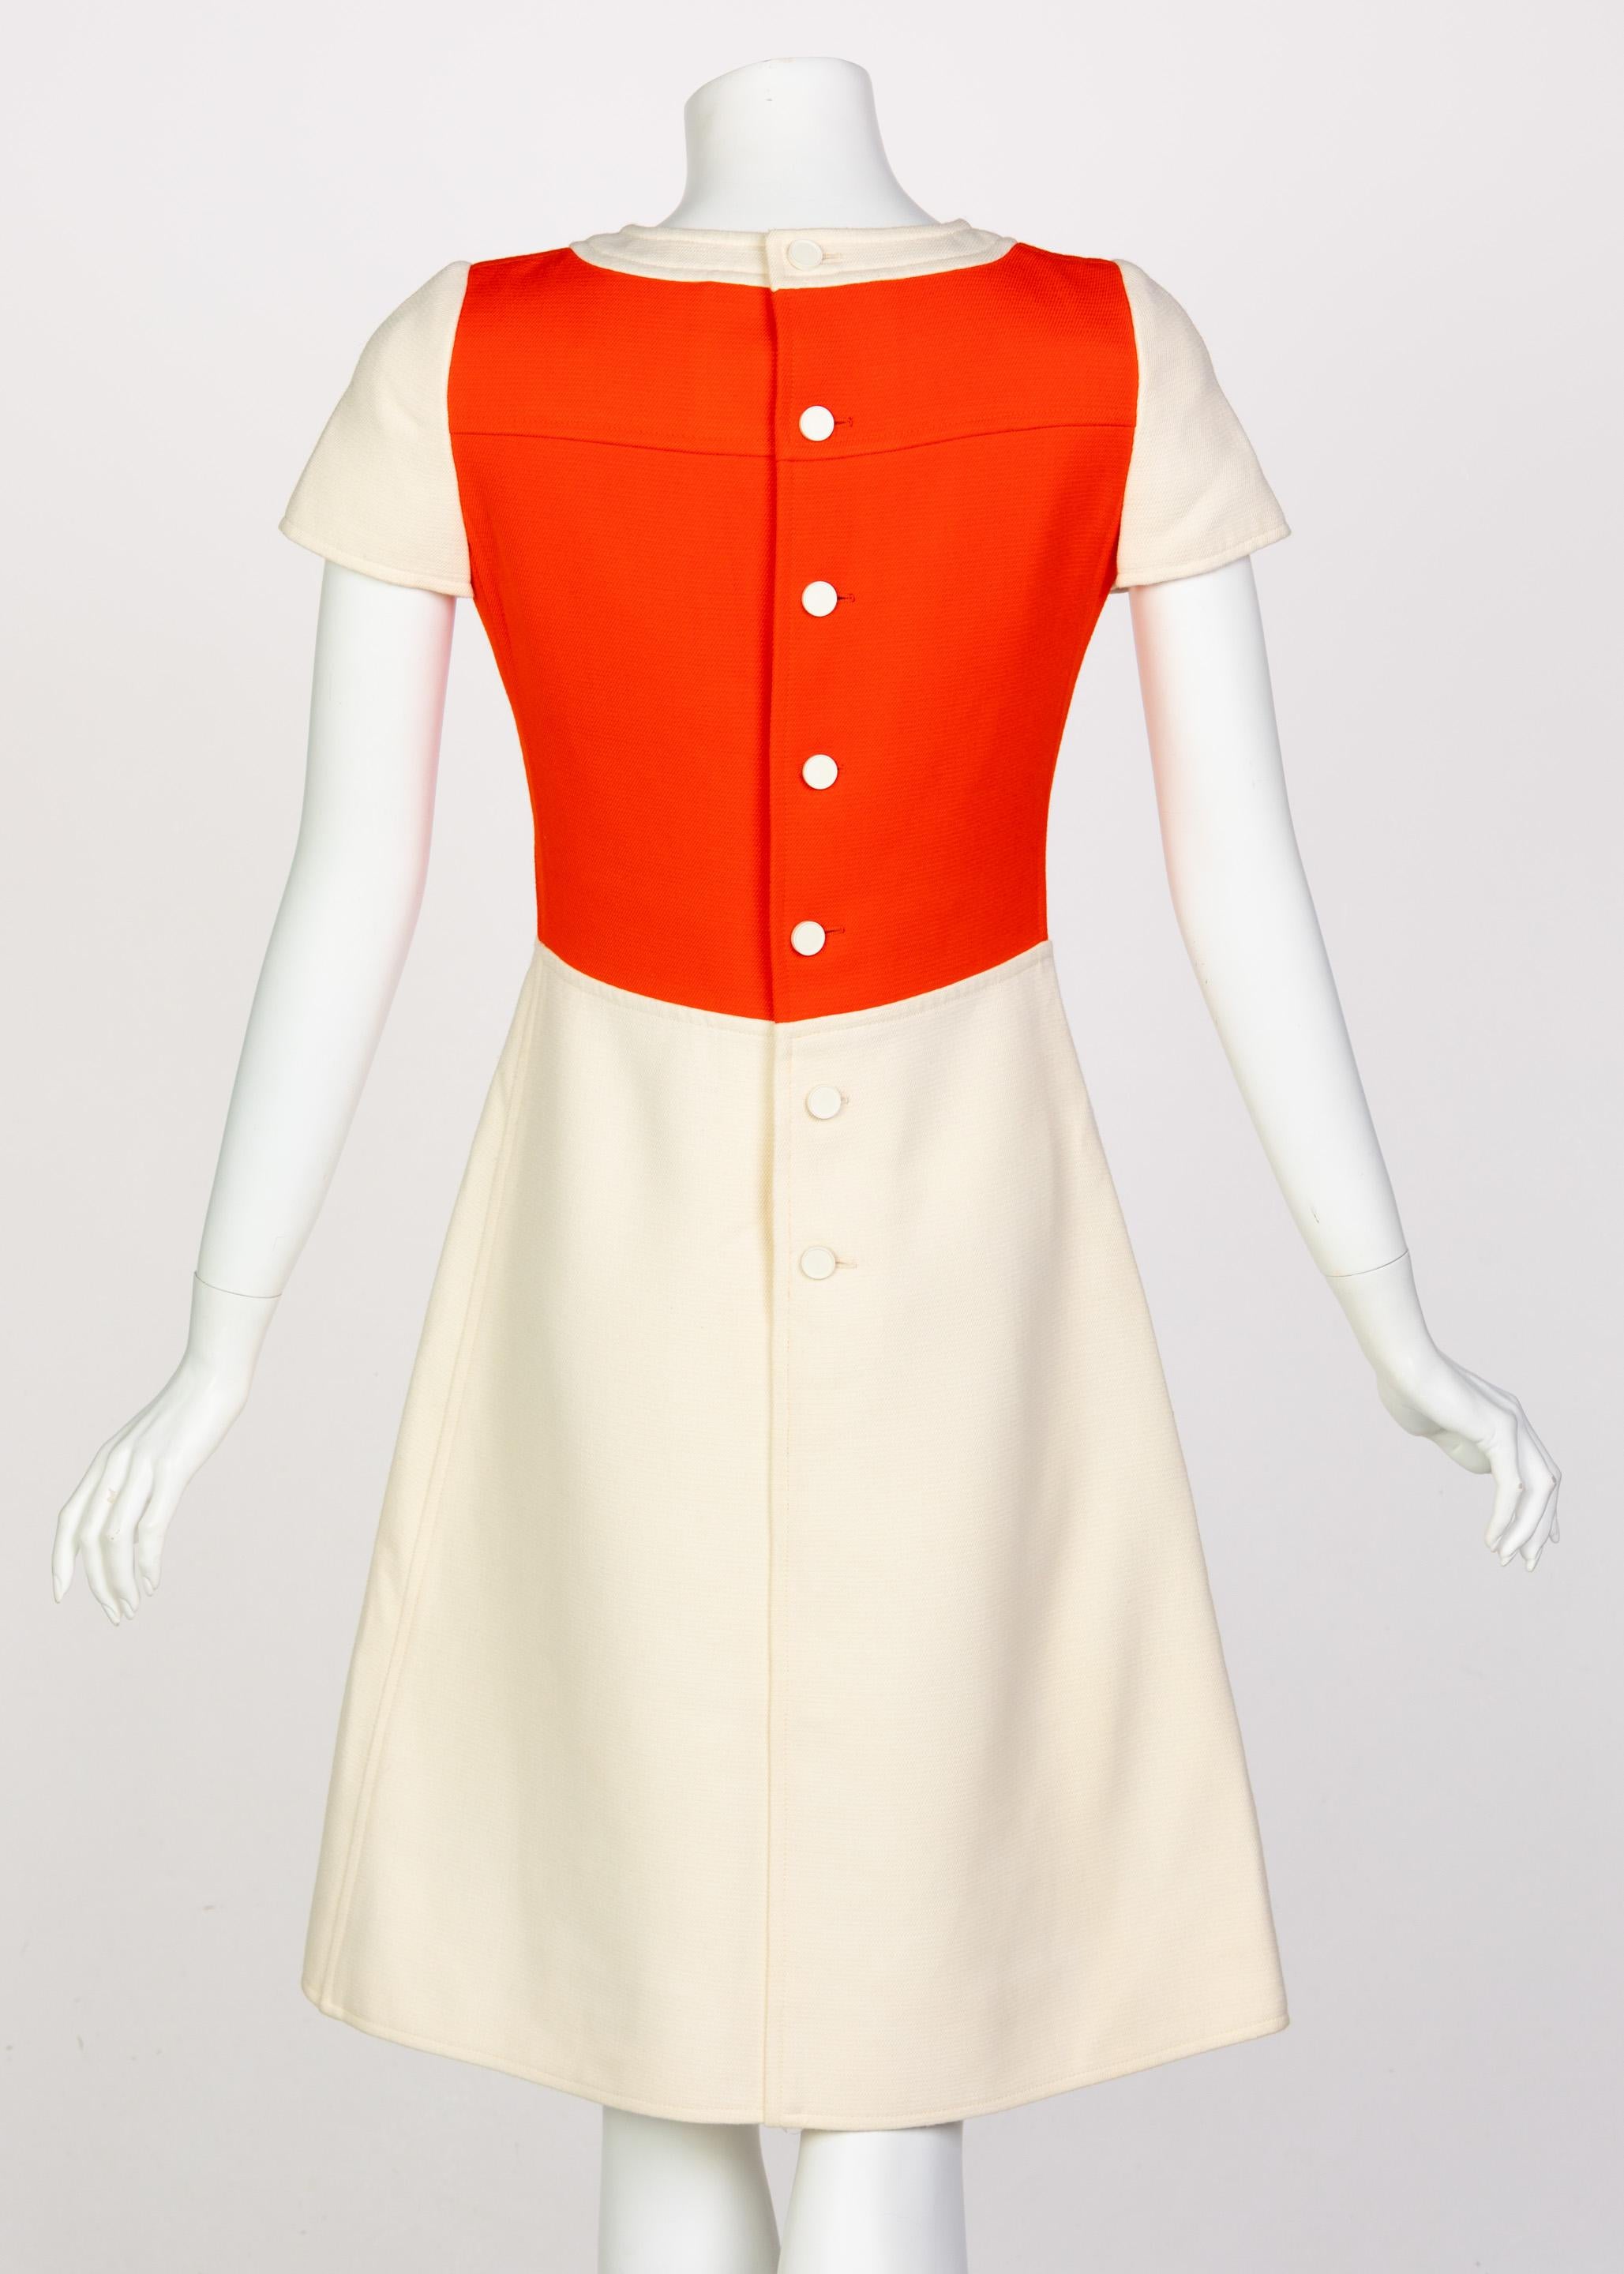 Women's Courreges Numbered Couture Creme Orange Mod a Line Dress, 1960s For Sale